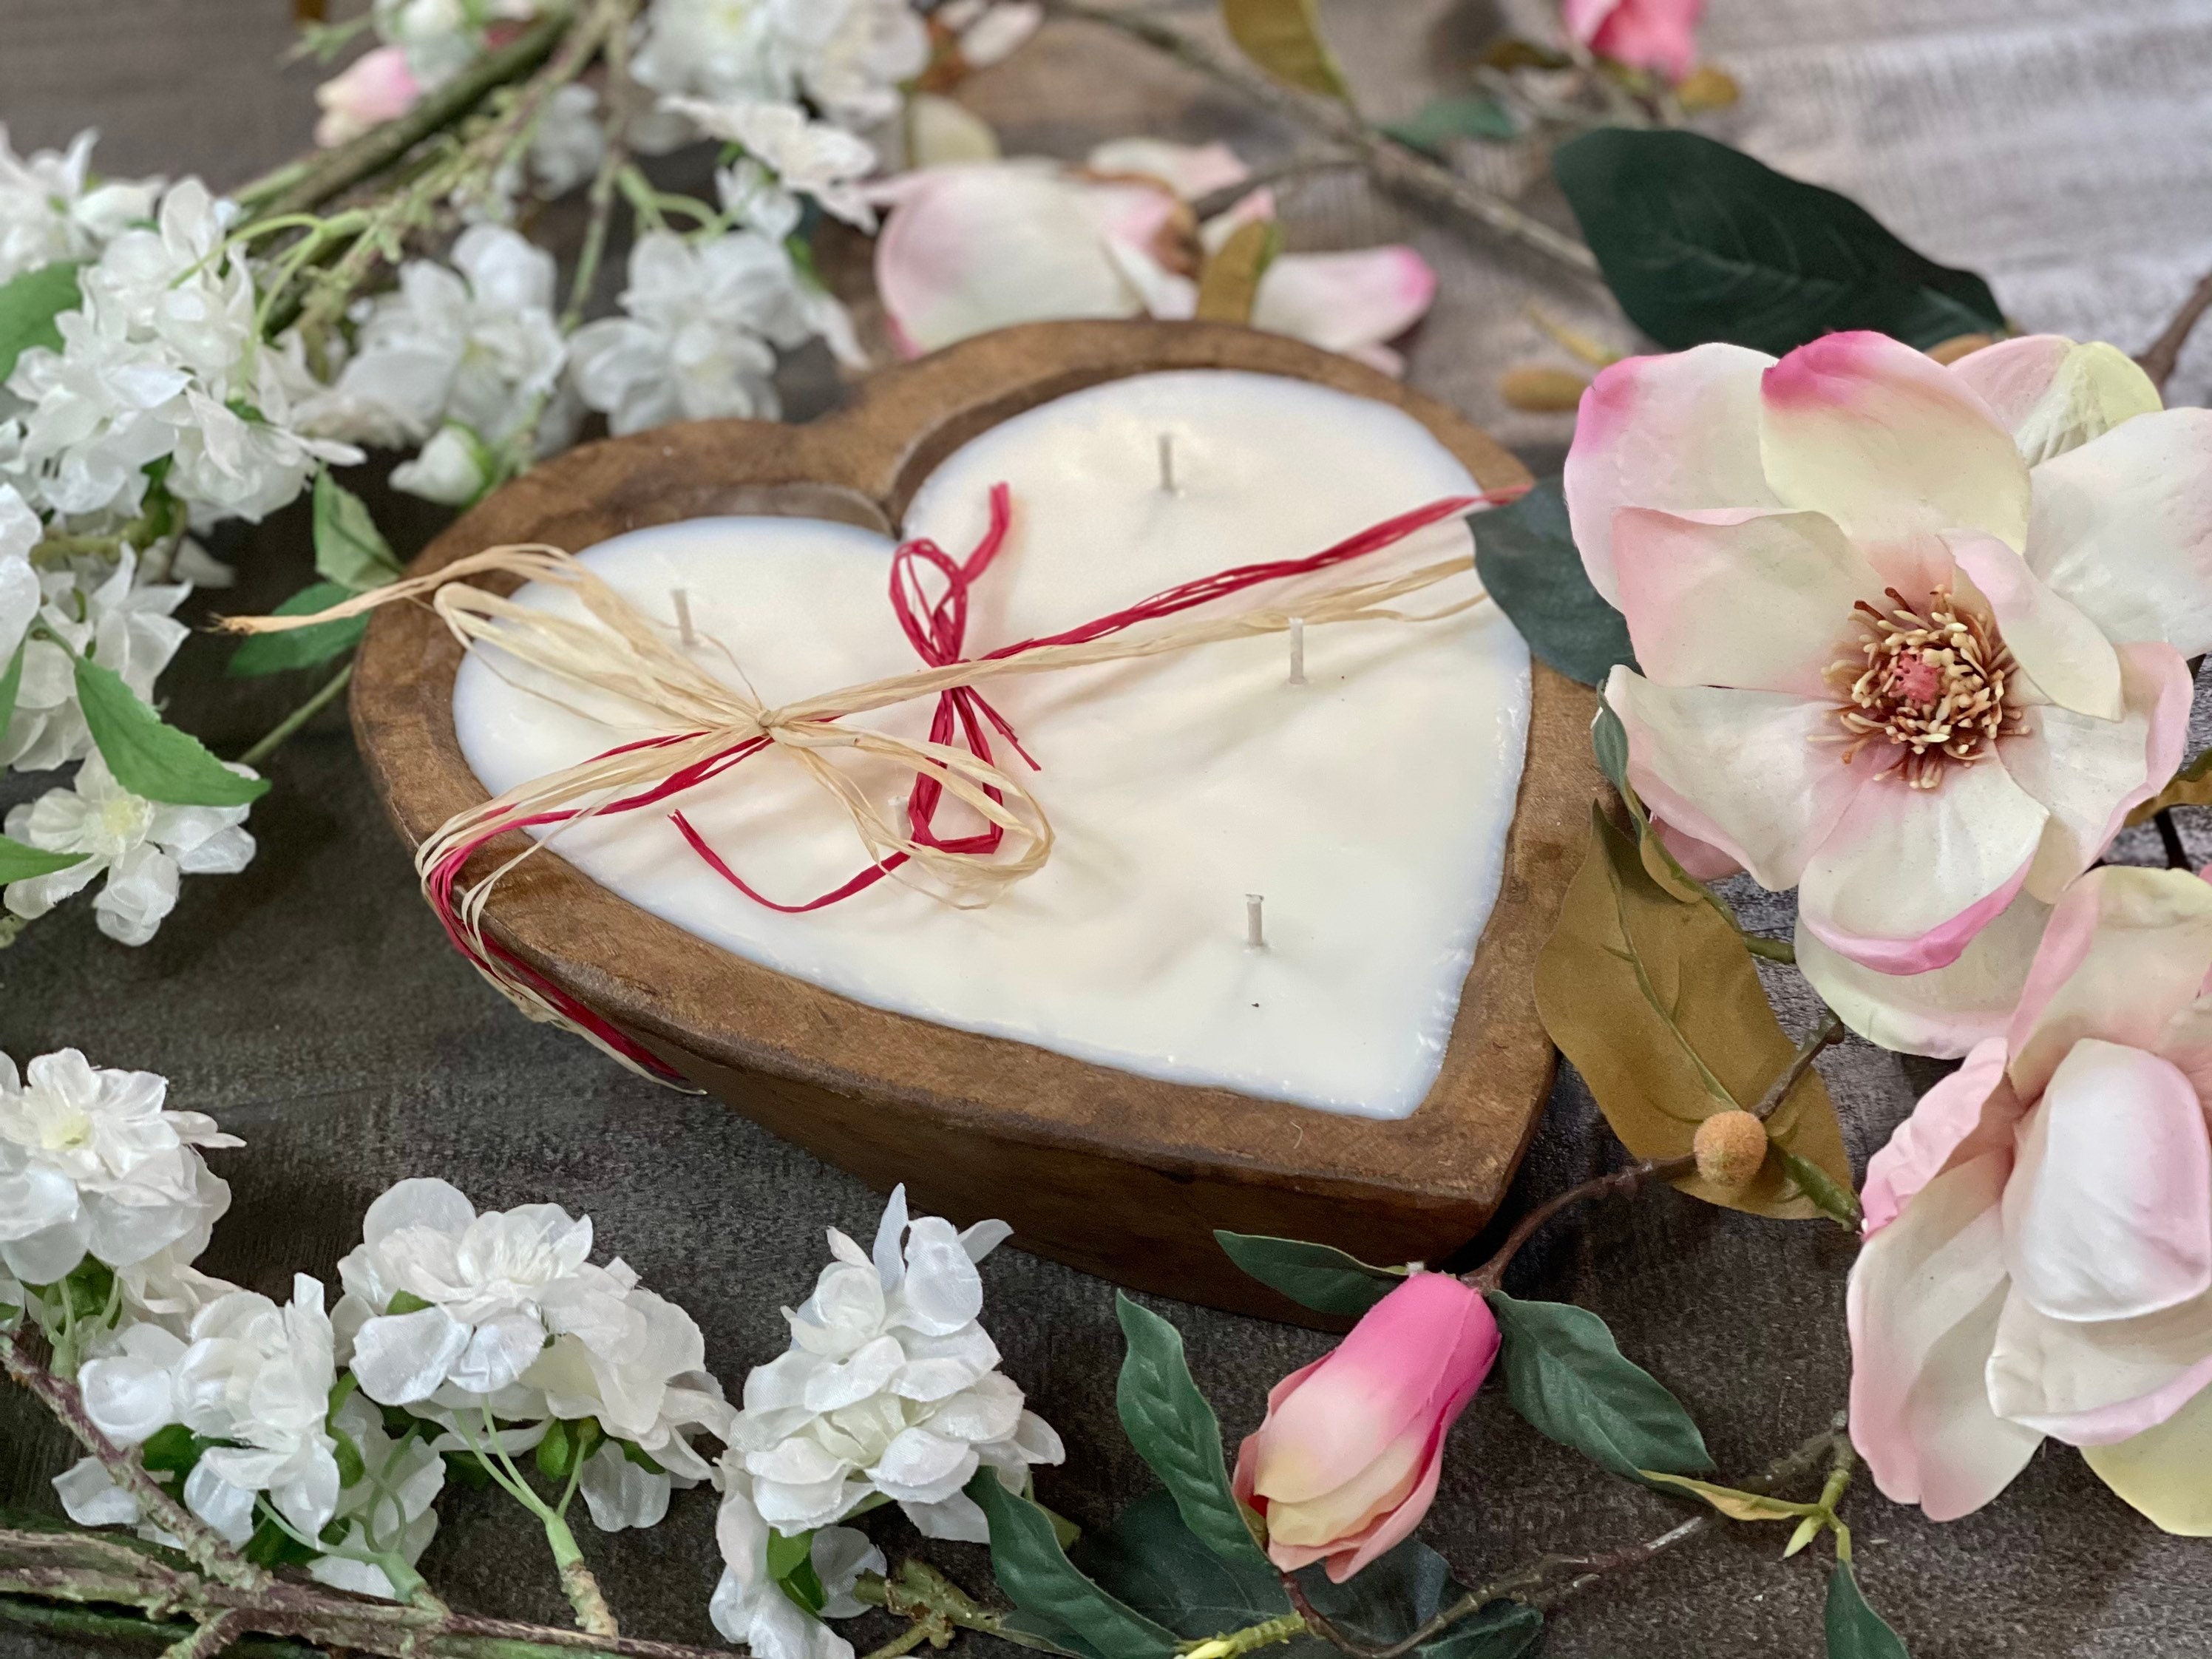 Heart Shaped Wooden Bowl Candle with Soy Wax - 3 Wicks 5 oz Decorative  Dough Bowl Candles for Anniversary Engagement Wedding Birthday Valentine  Gift